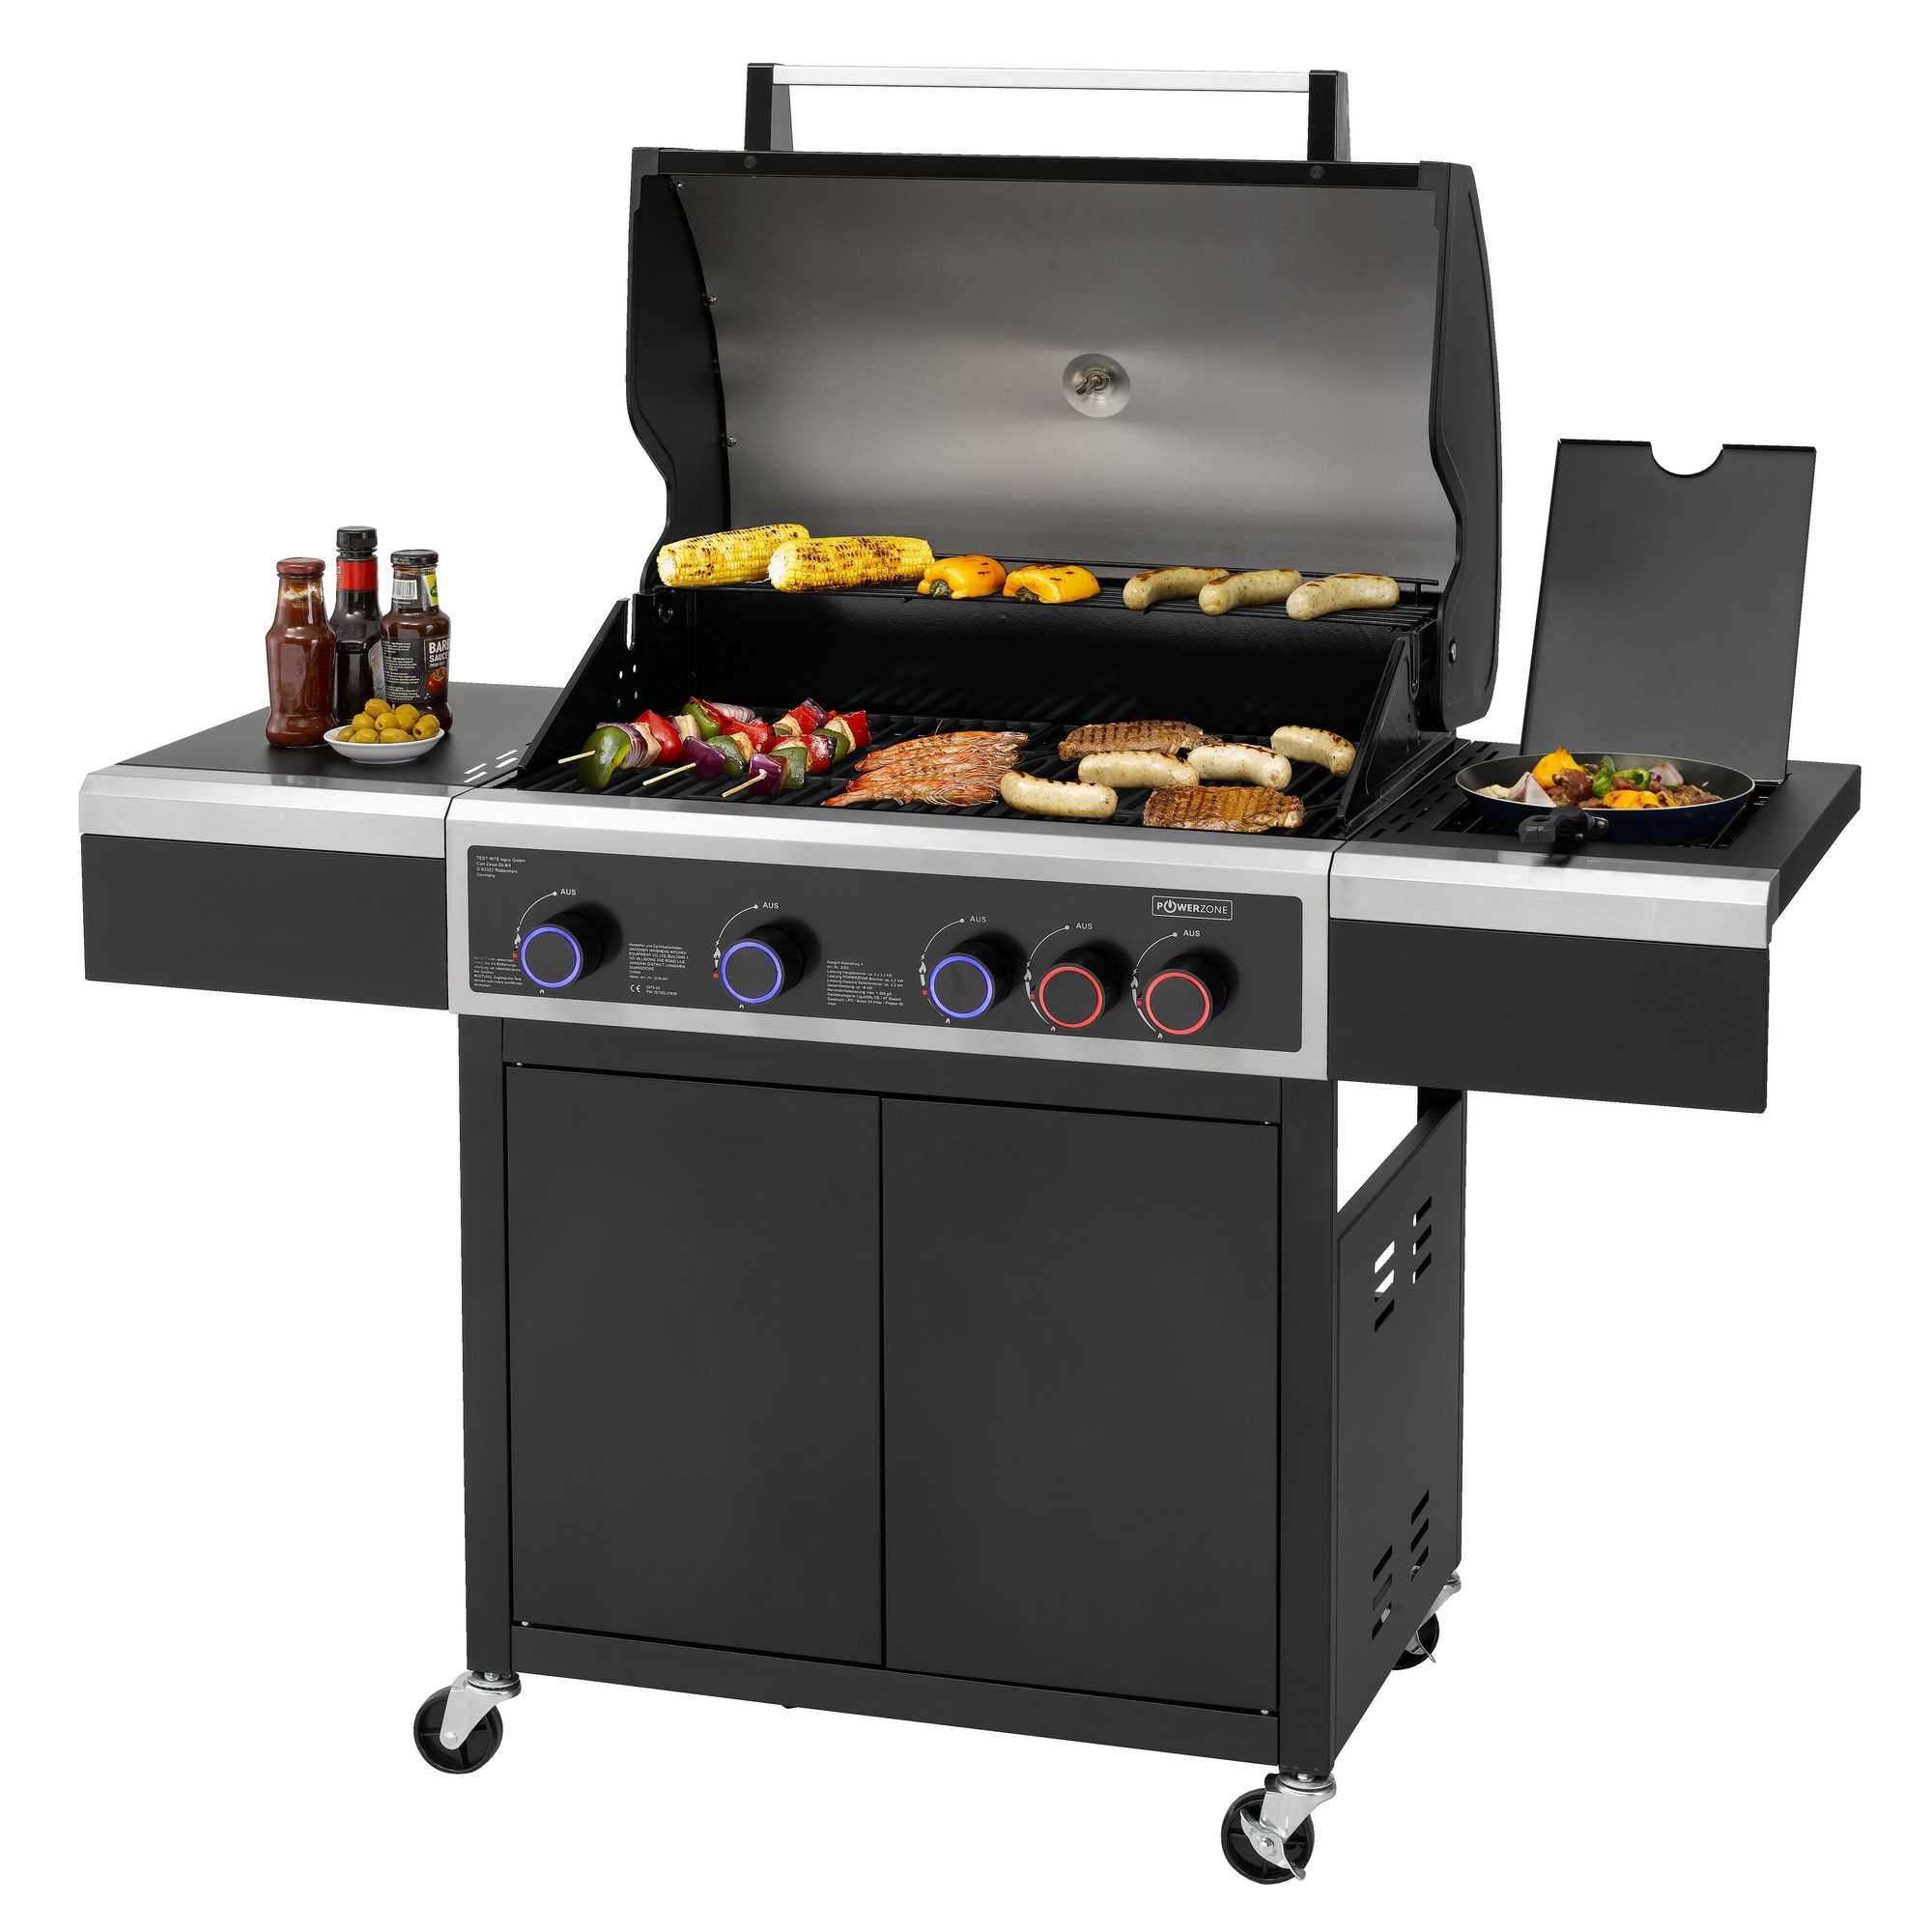 Gasgrill 'Keansburg 4' 5 Brenner, Edelstahl, 138 x 114 x 63 cm + product picture